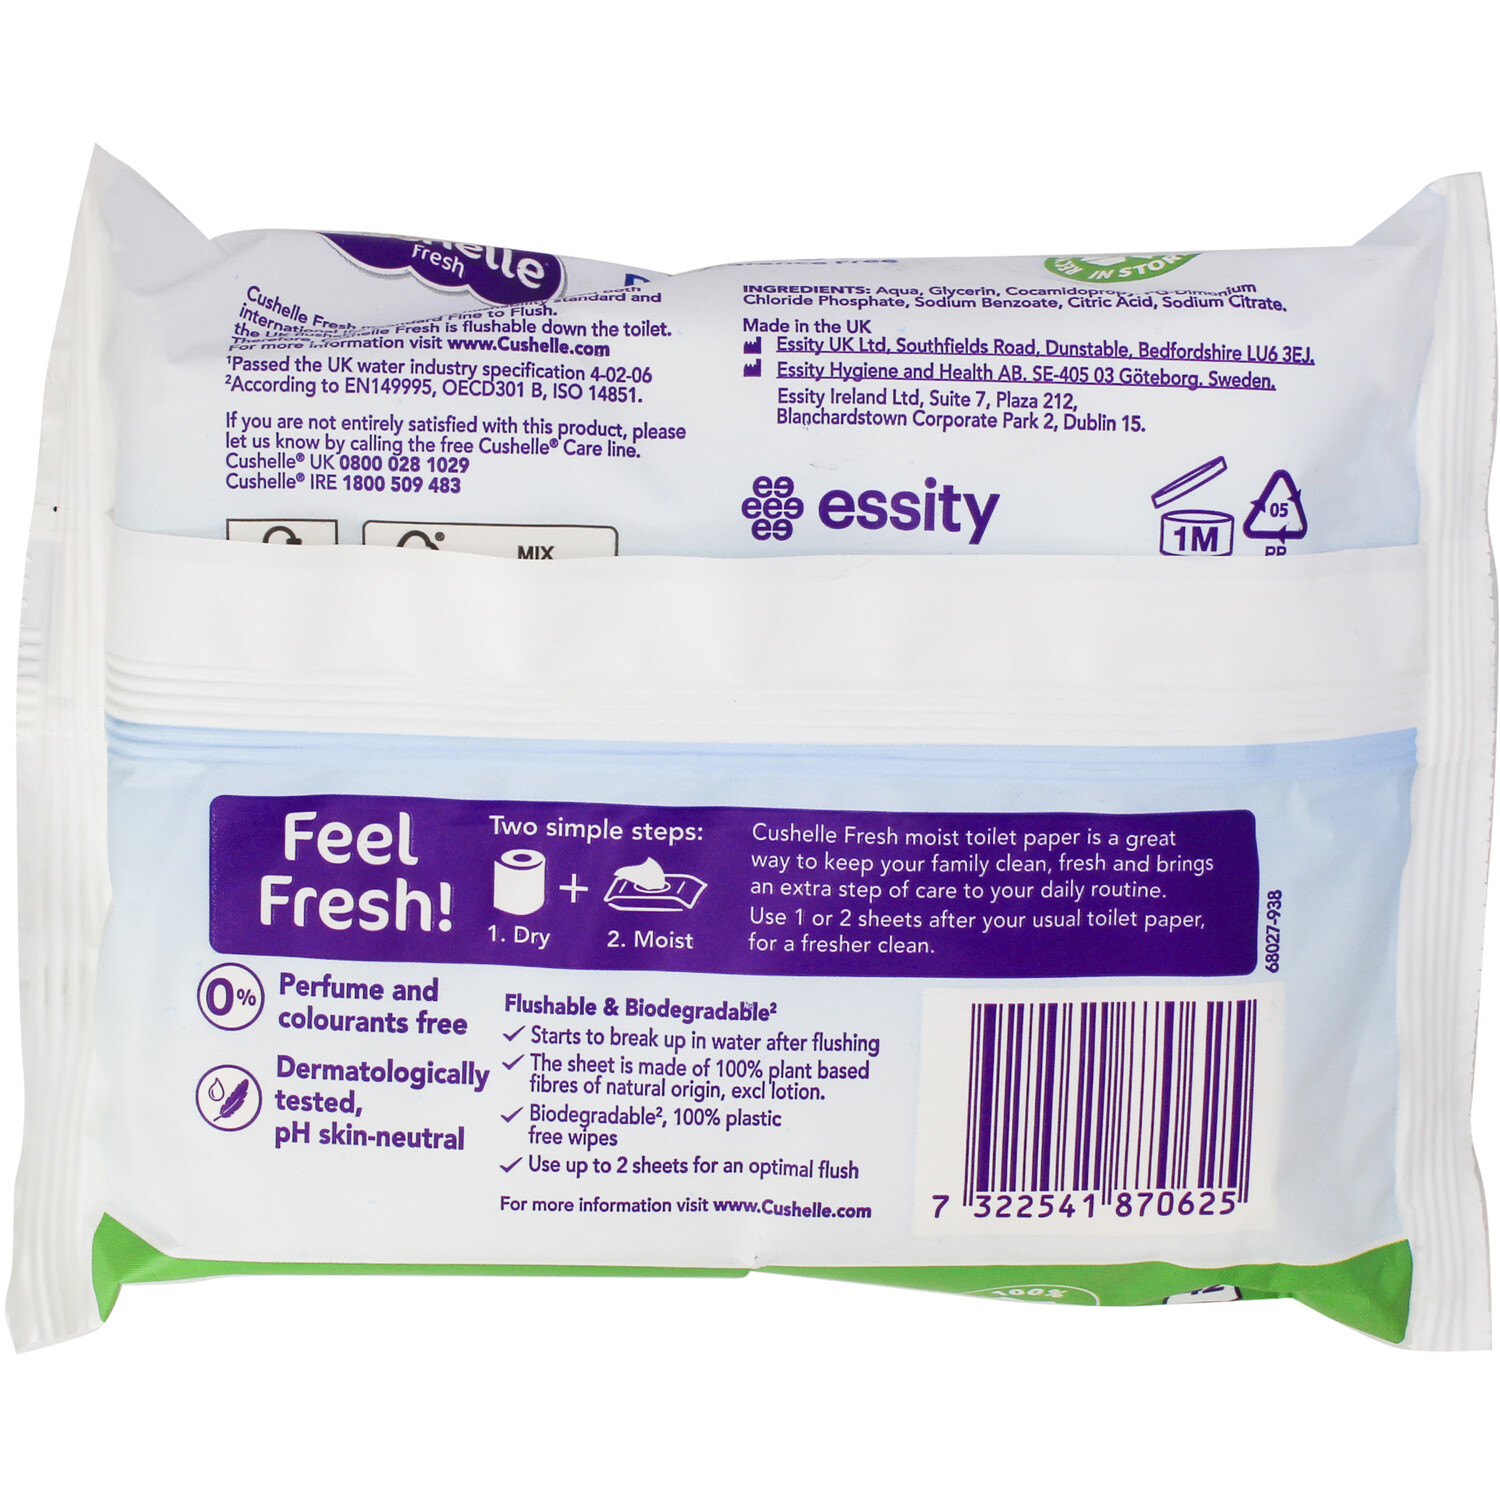 Cushelle Pure and Gentle Toilet Wipes Image 2